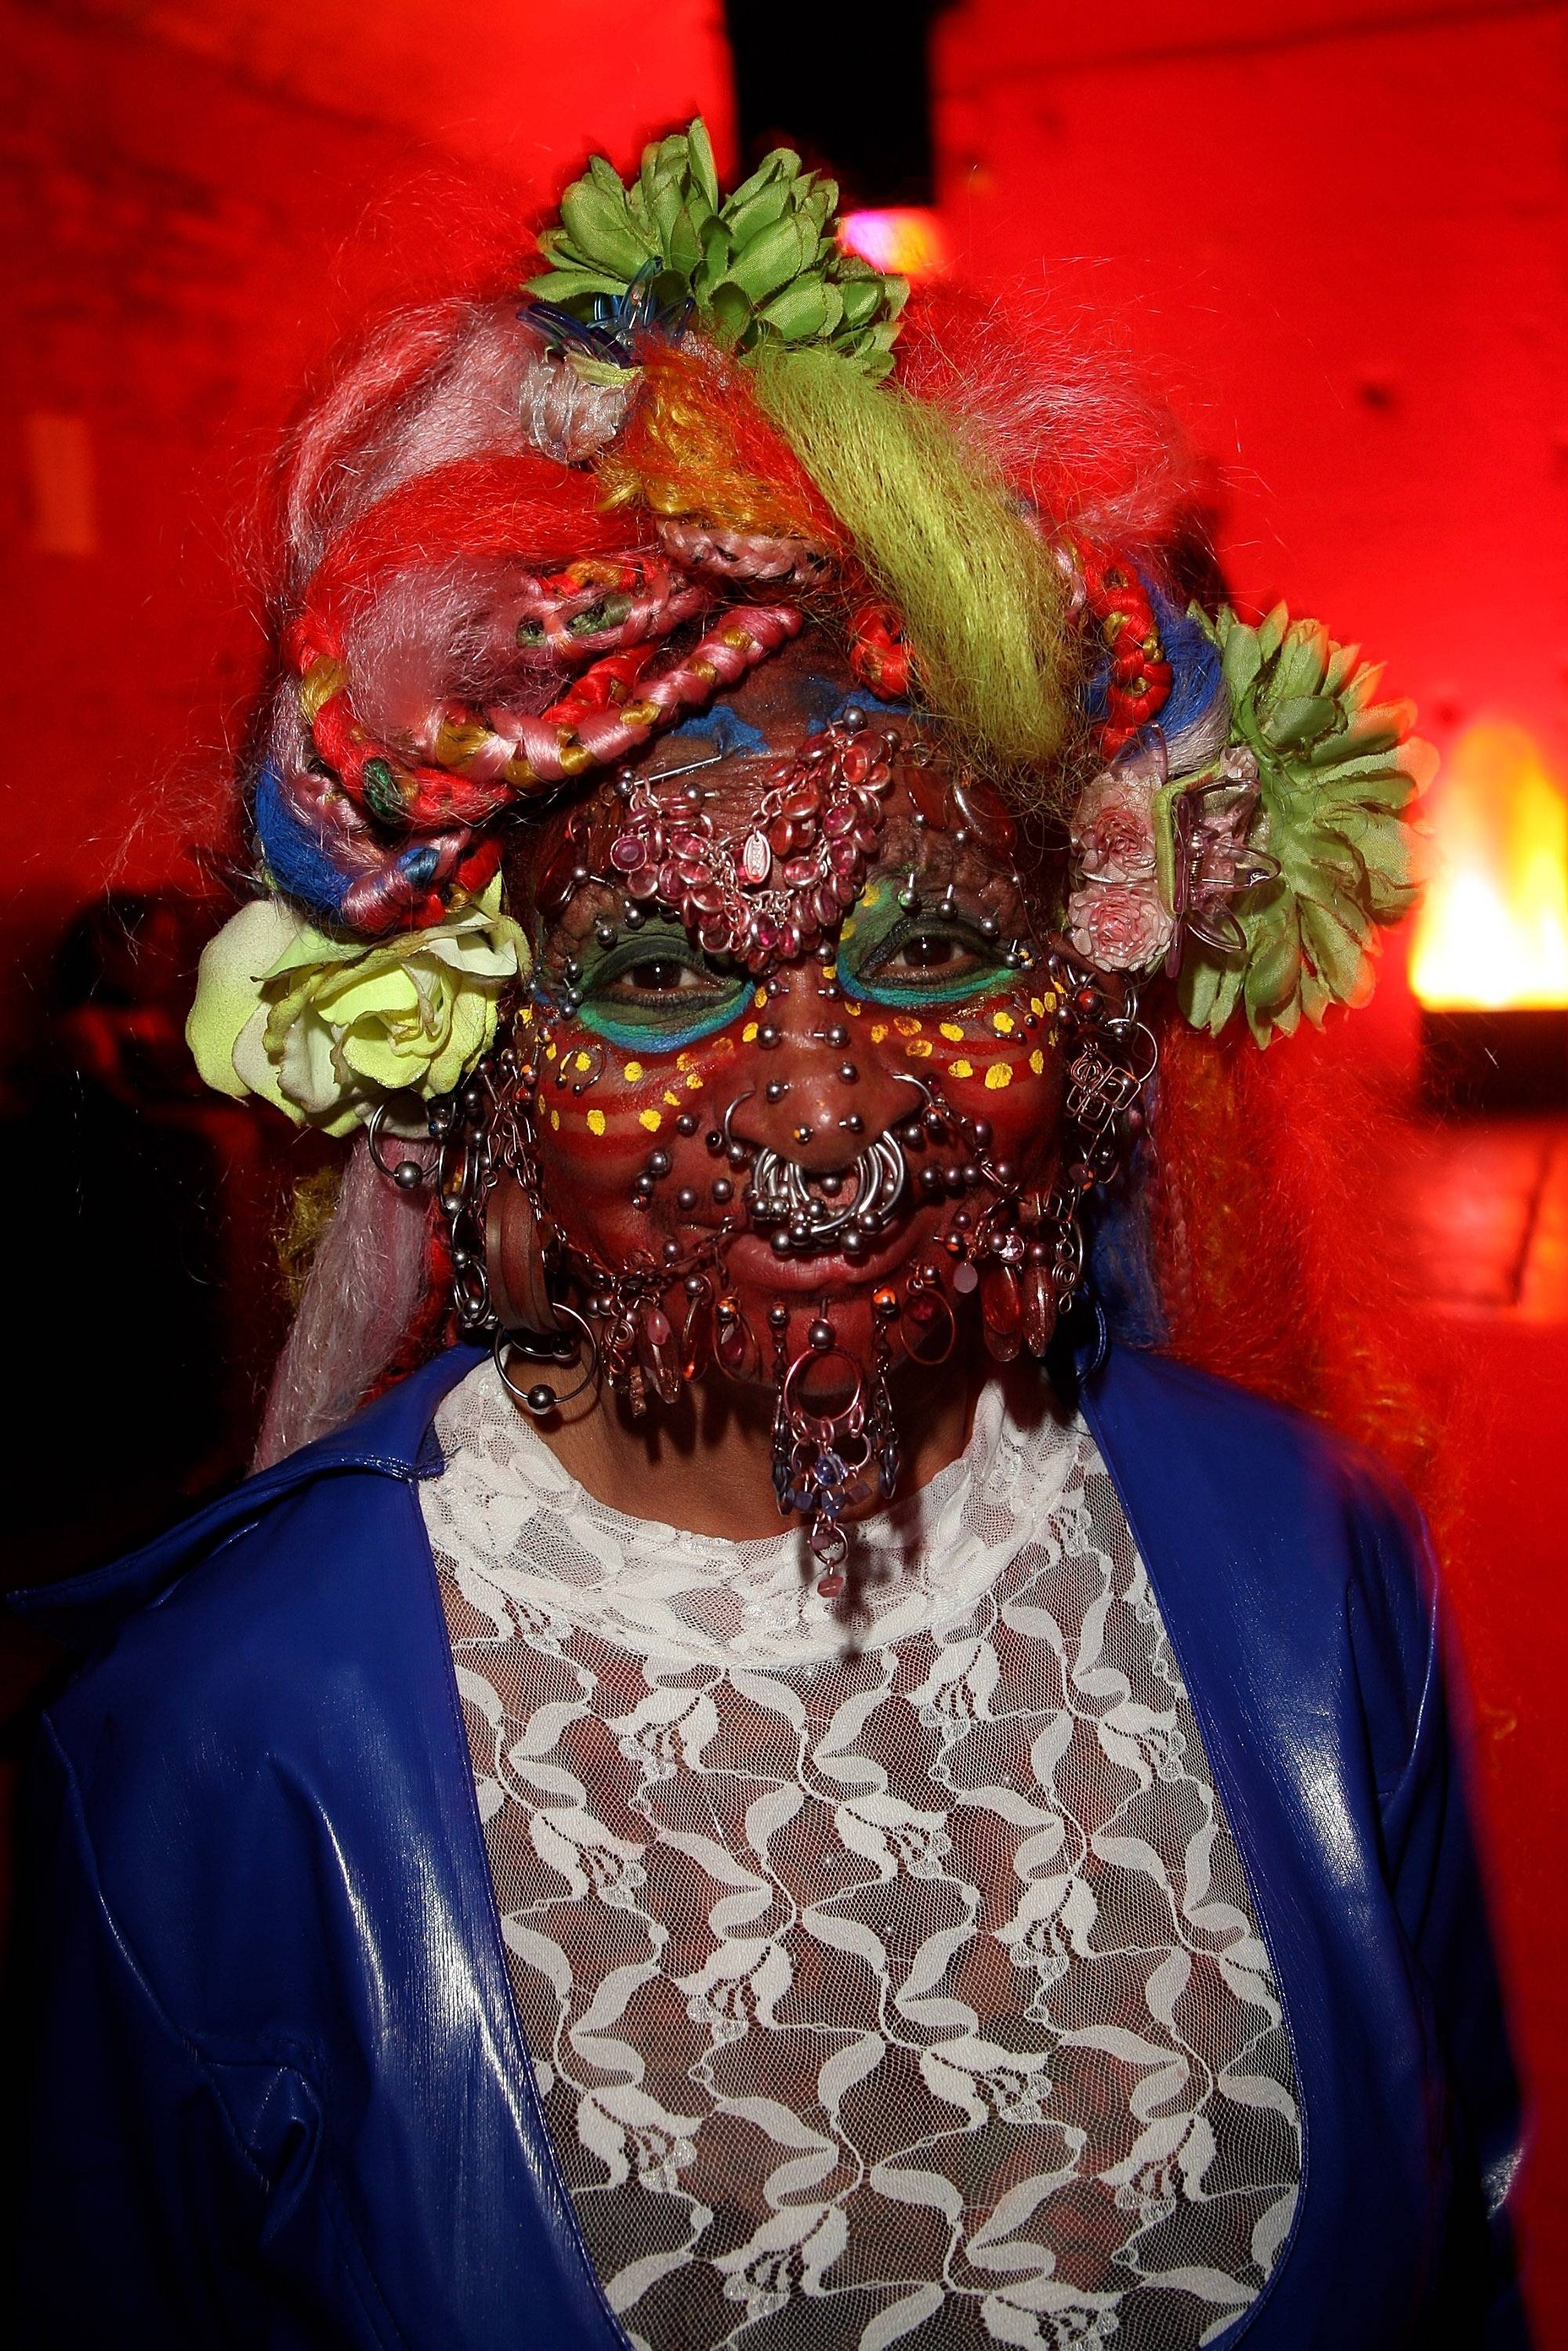 LONDON - OCTOBER 06:  (UK TABLOID NEWSPAPERS OUT) Elaine Davidson, record holder as the most pierced woman, attends the Skin Two Rubber Ball at SeOne on October 6, 2007 in London, England. The 16th annual event celebrates fetish glamour and style.  (Photo by Dave Hogan/Getty Images)